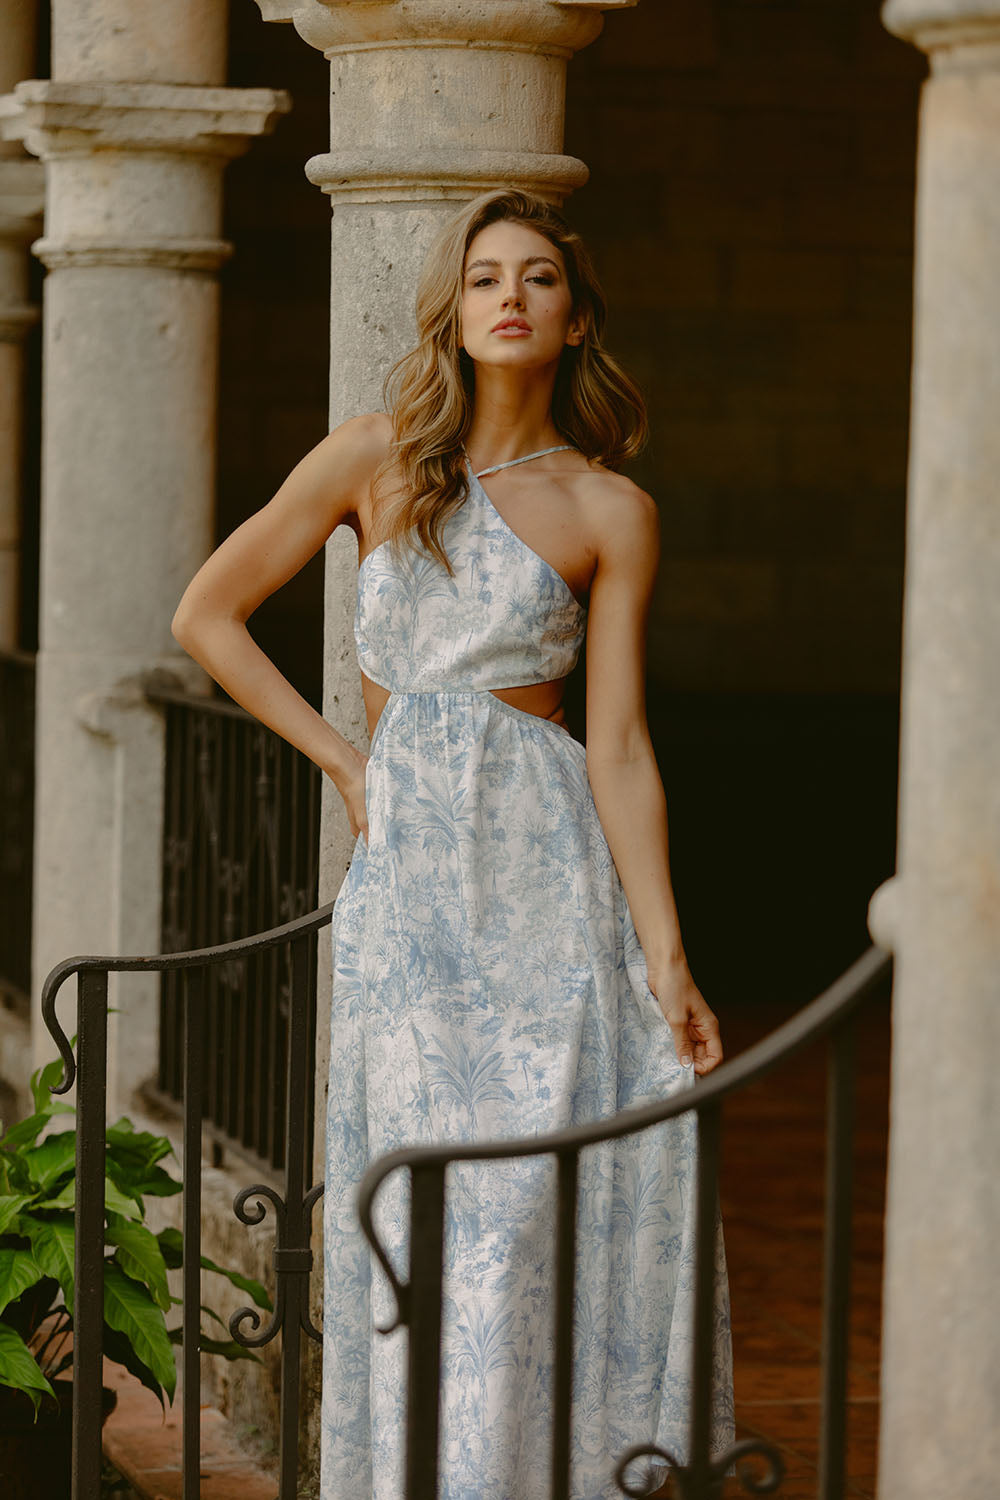 Woman in blue toile dress